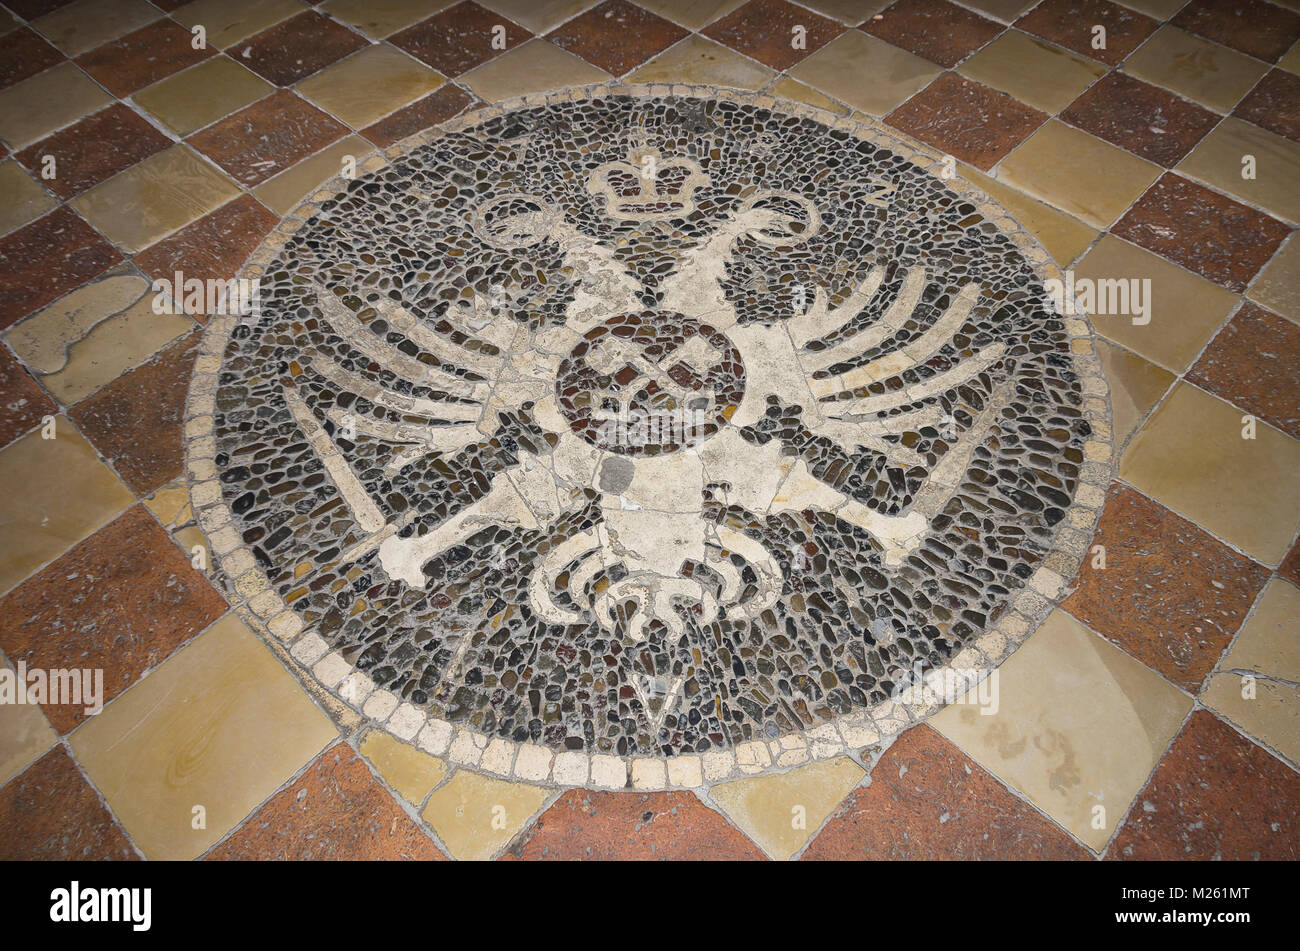 The double imperial eagle of the Habsburgs with the city coat of arms in the Old Town Hall of Regensburg, Bavaria, Germany. Stock Photo